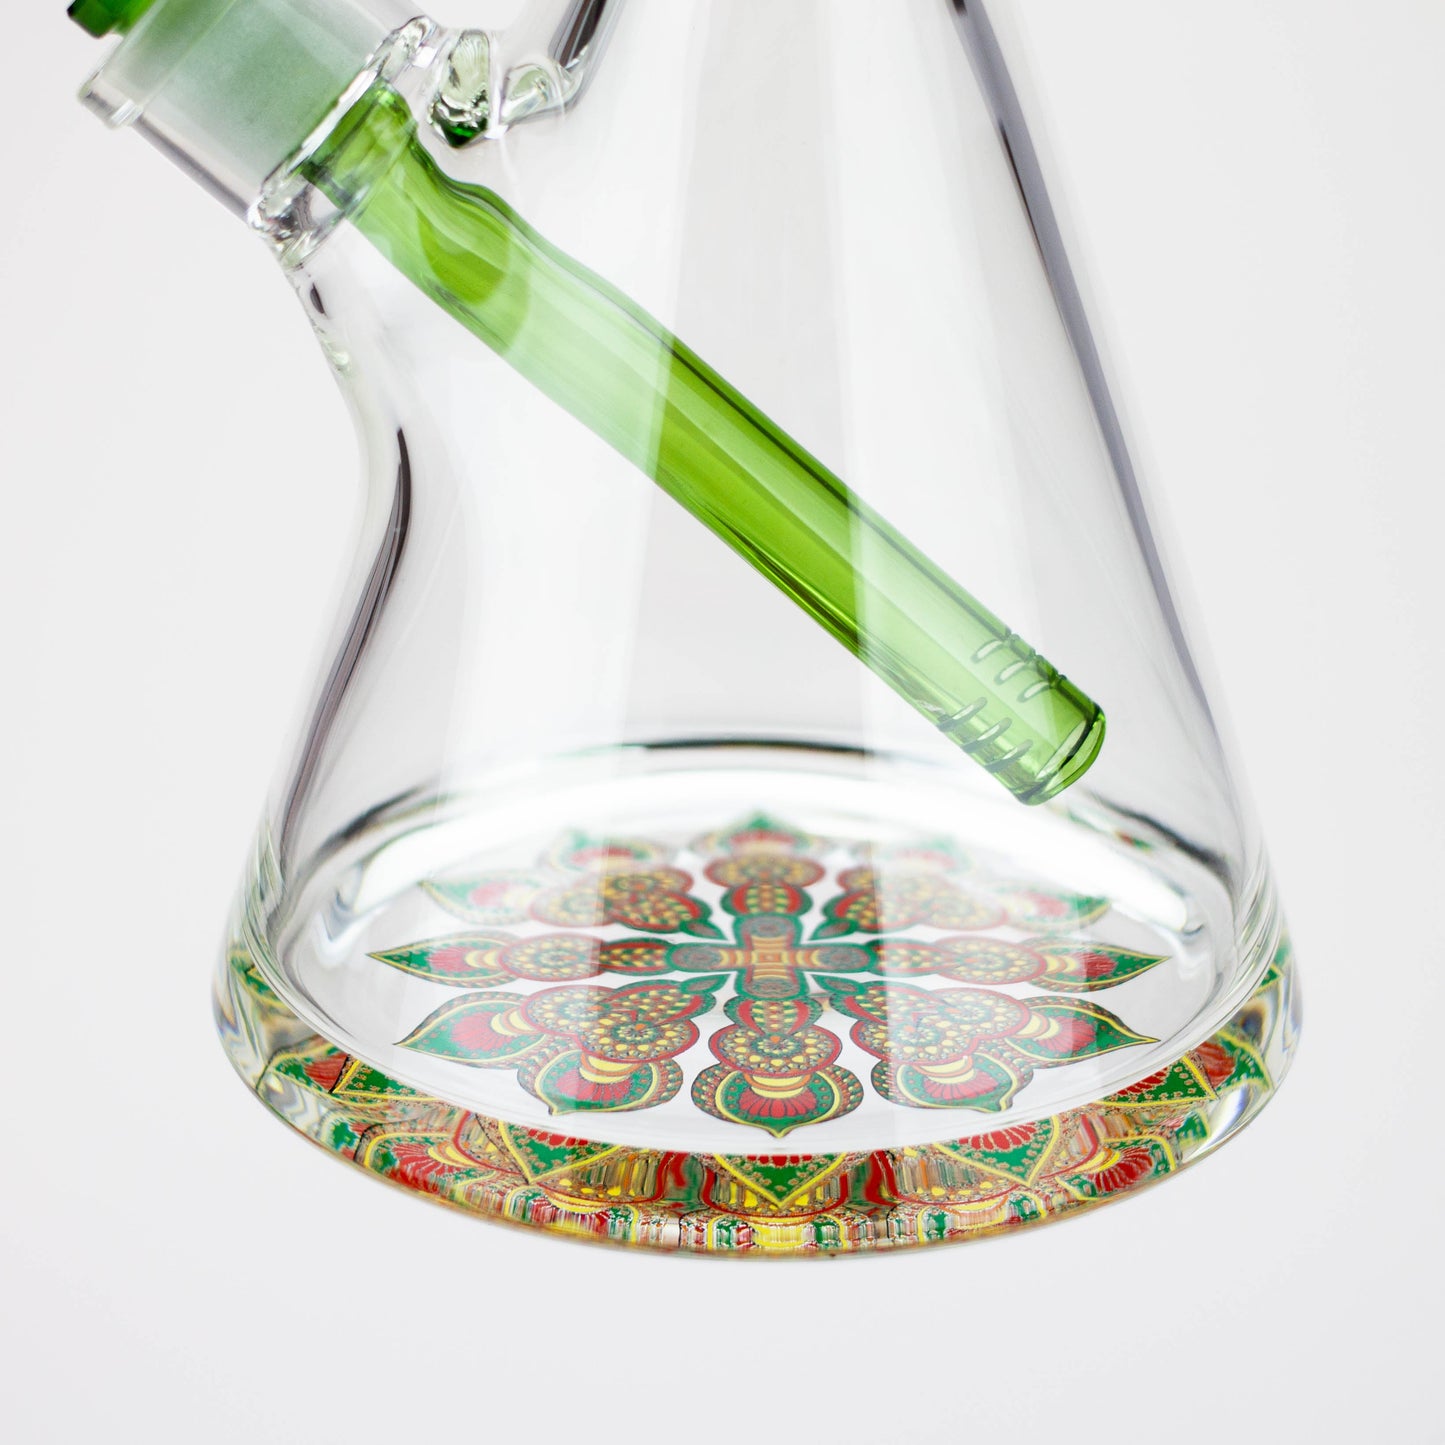 18" Spark 9 mm glass water bong with thick base_4